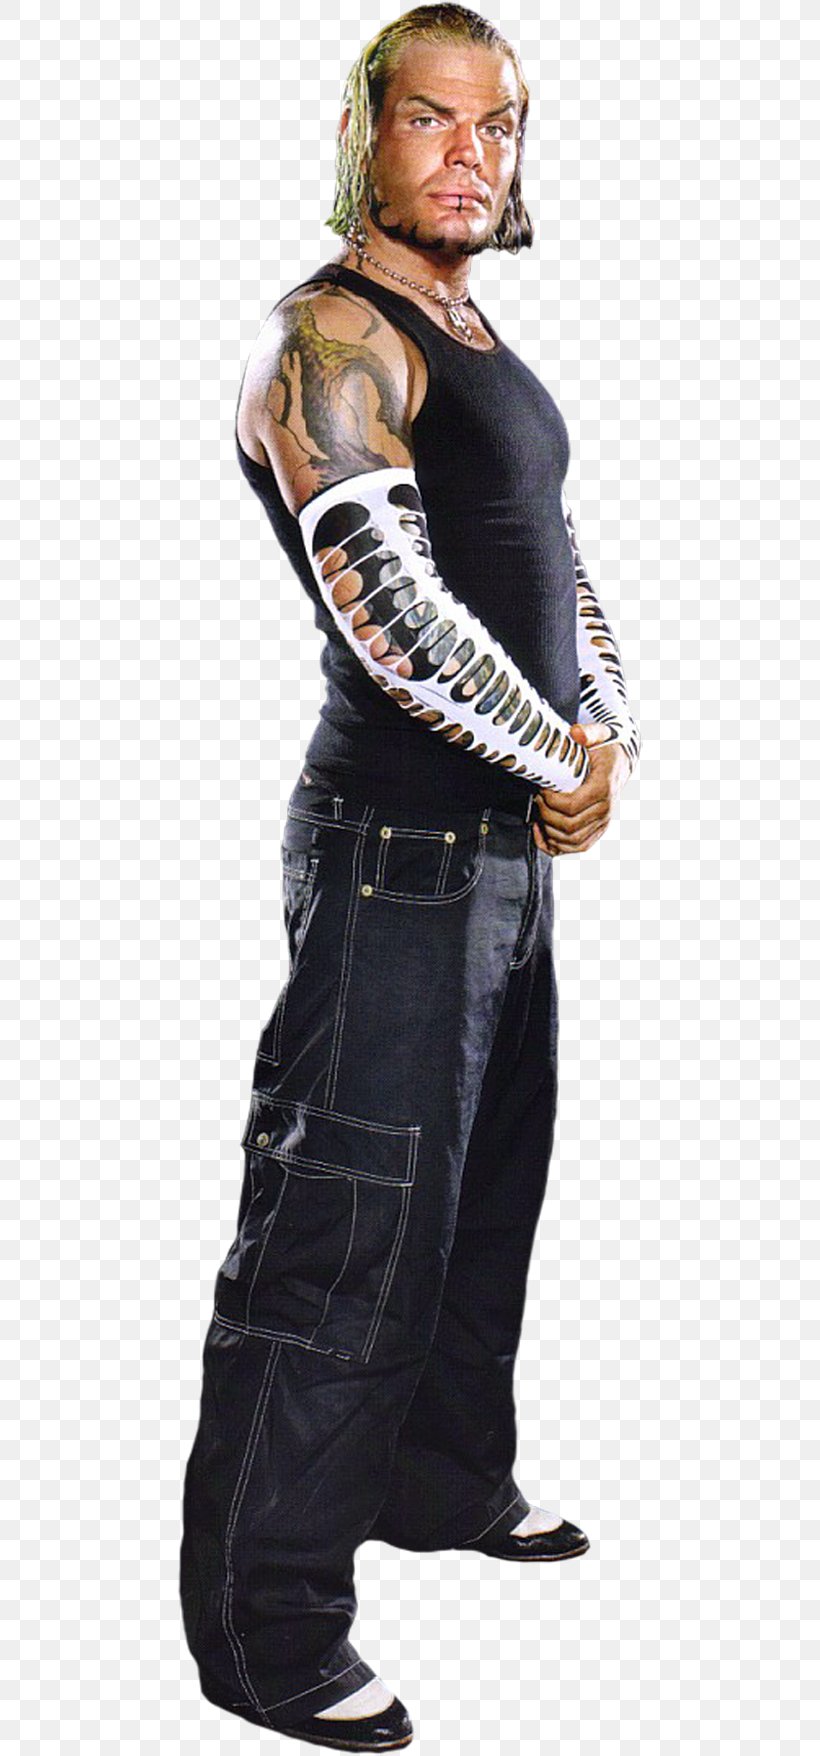 Jeff Hardy Musician Jeans Outerwear Costume, PNG, 467x1756px, Jeff Hardy, Costume, Jeans, Musician, Outerwear Download Free